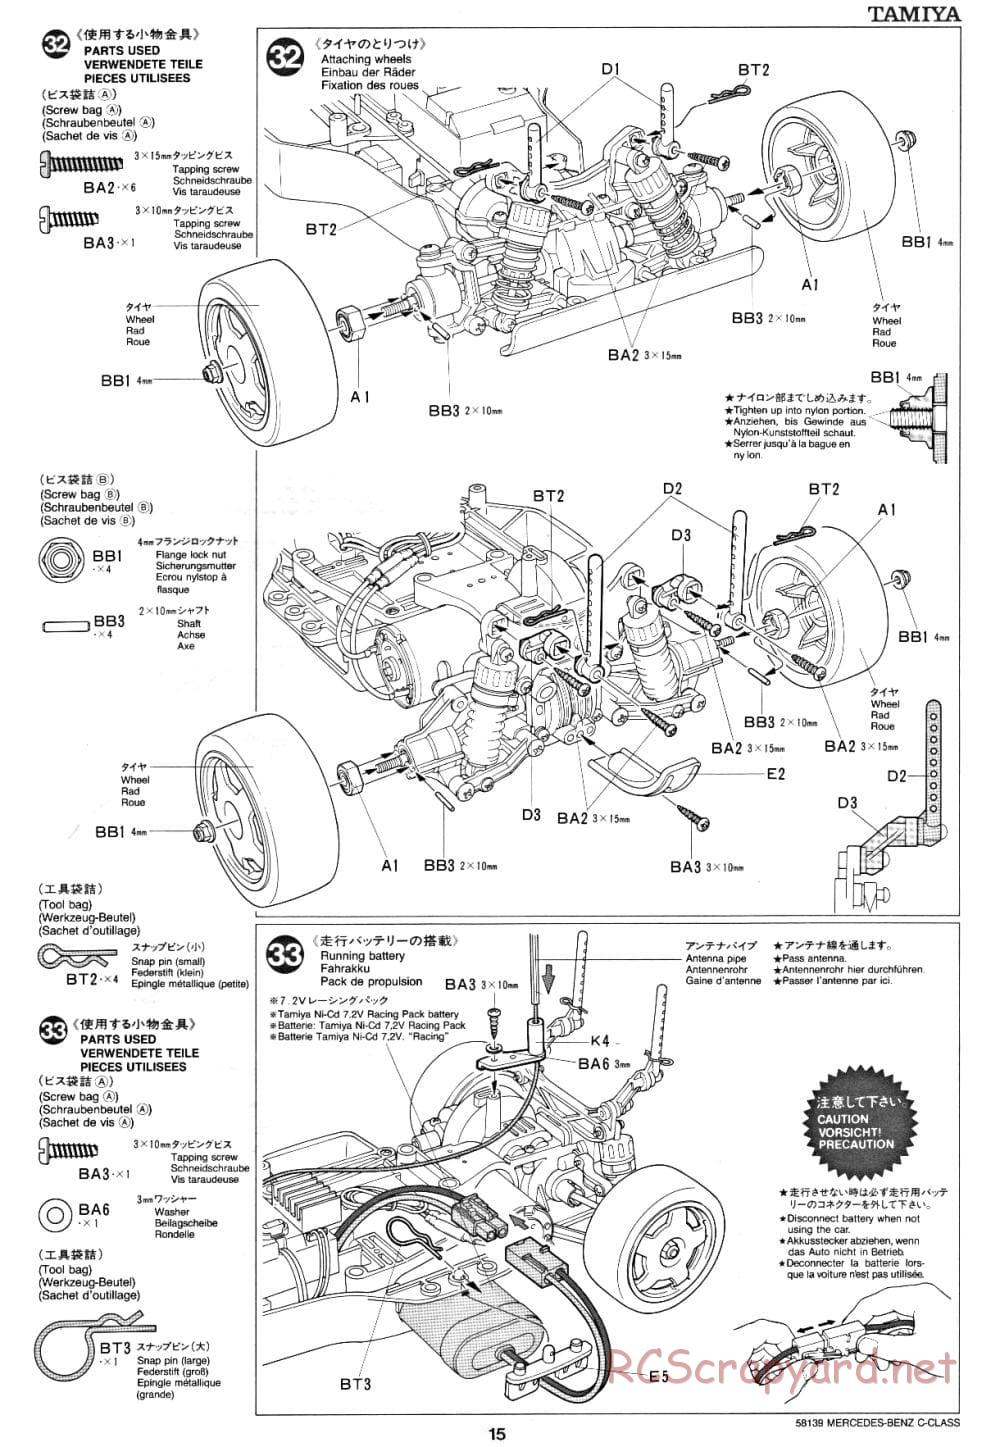 Tamiya - AMG Mercedes-Benz C-Class DTM D2 - TA-02 Chassis - Manual - Page 15